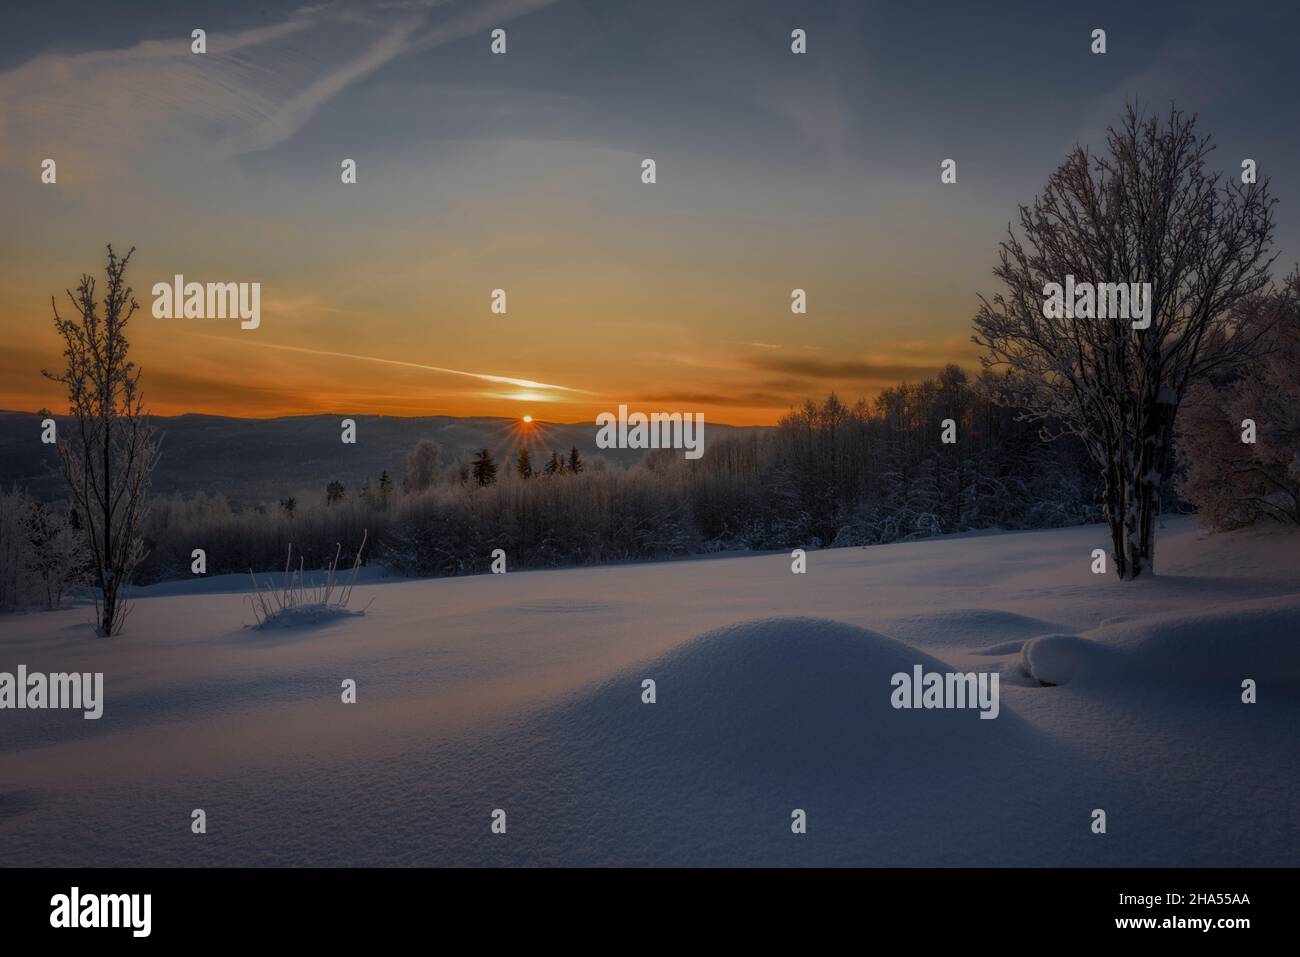 winter mountain landscape during an sunset with trees Stock Photo